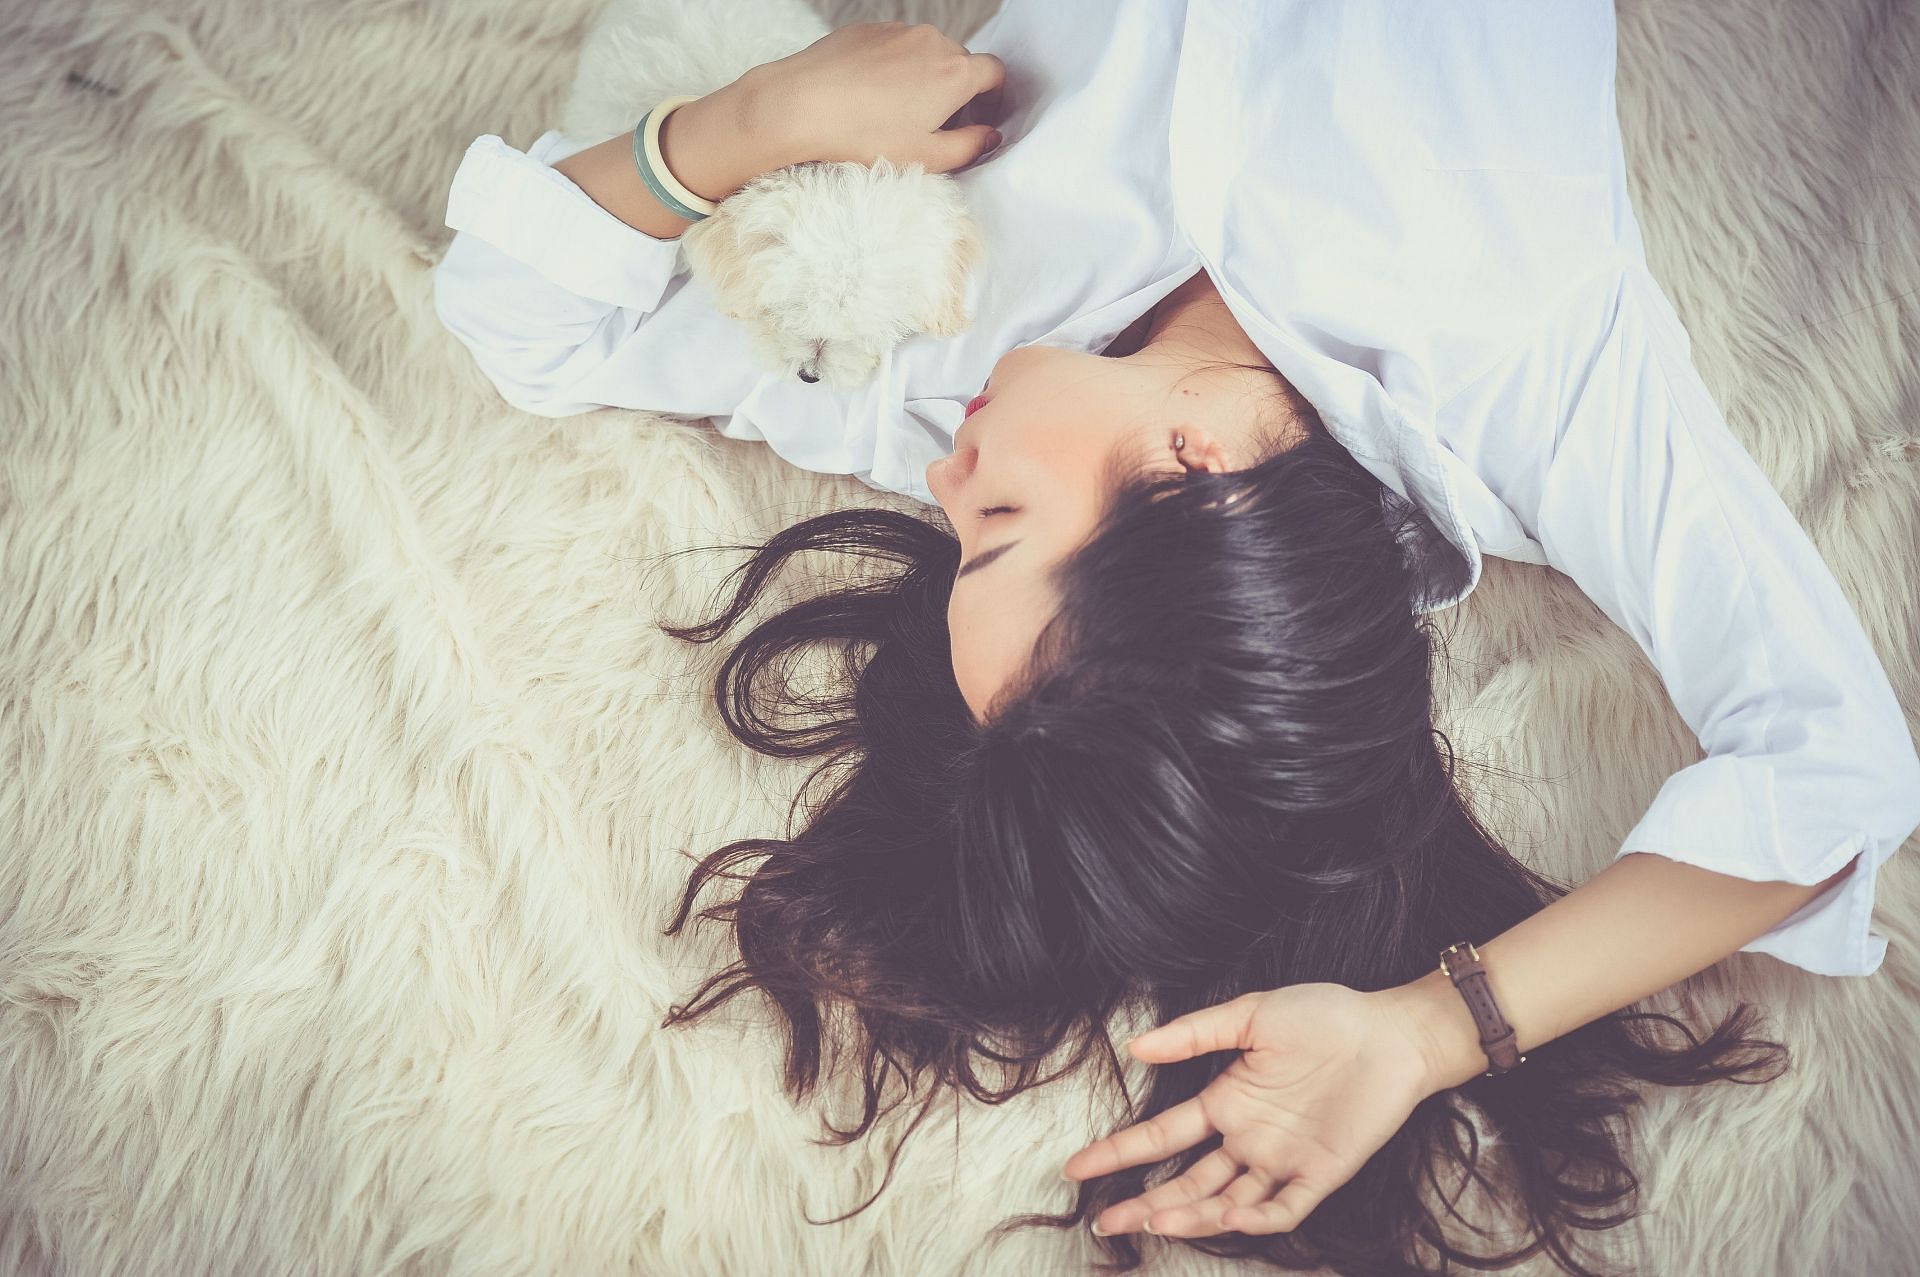 Pets provide a reason for you to wake up every day. (Photo via Pexels/Pixabay)